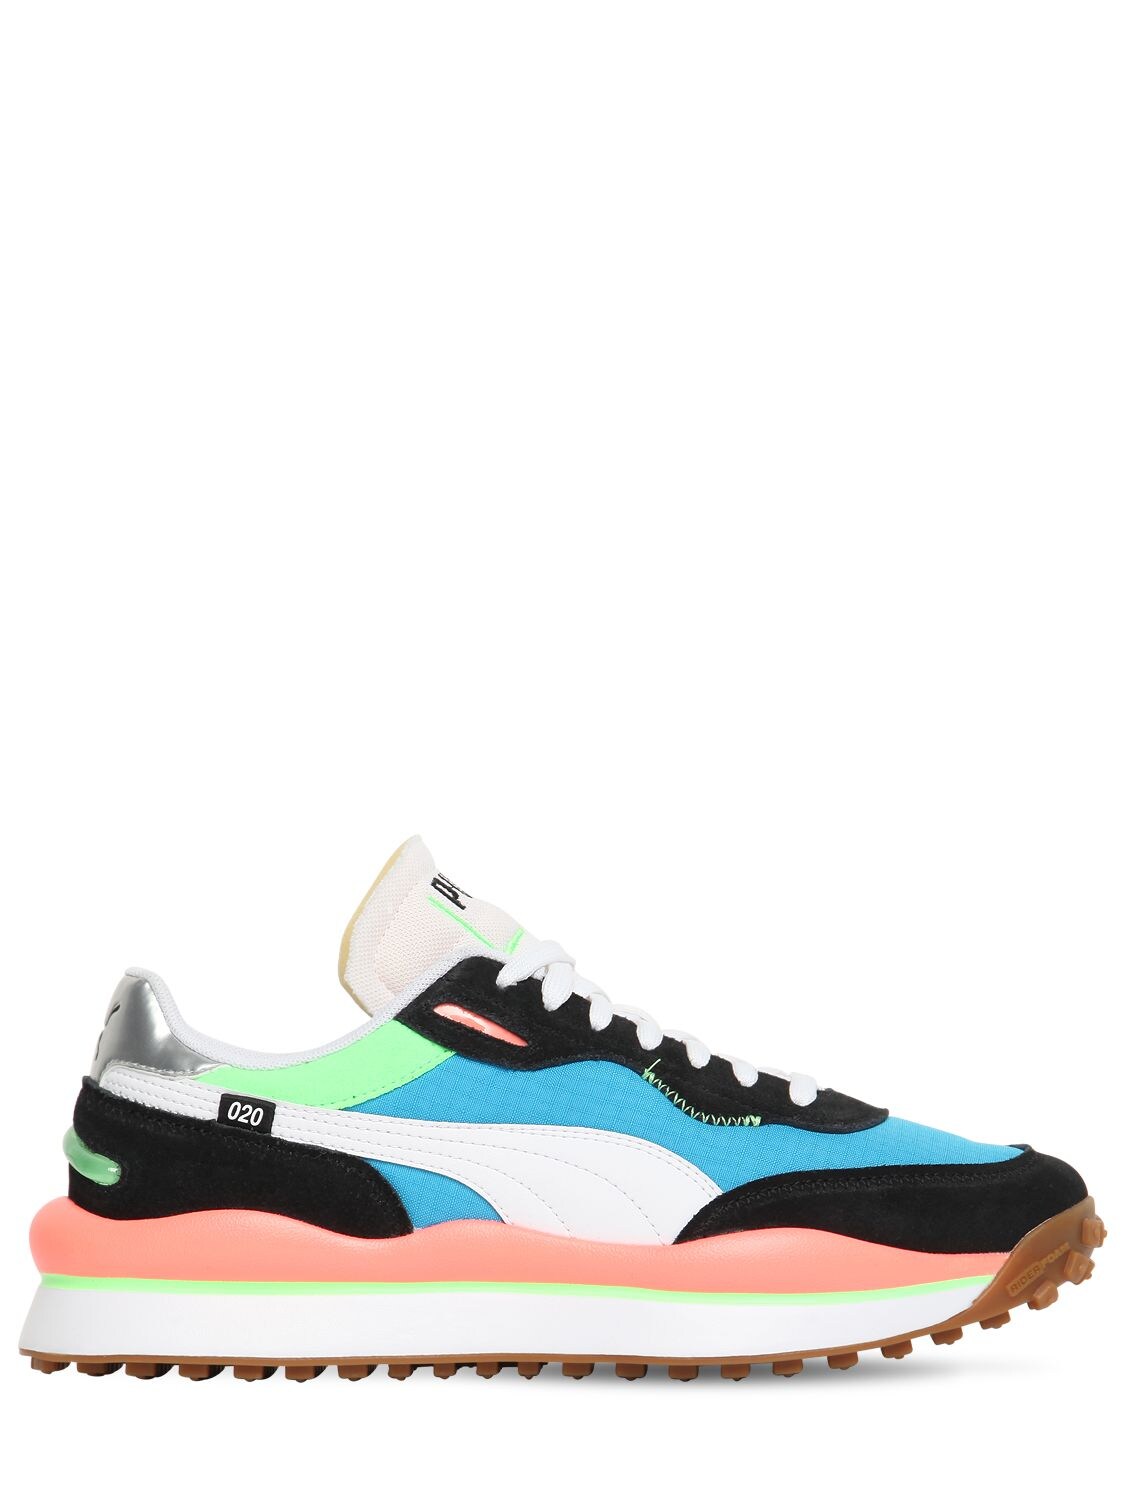 PUMA STYLE RIDER GAME ON SNEAKERS,72I0II022-MDY1